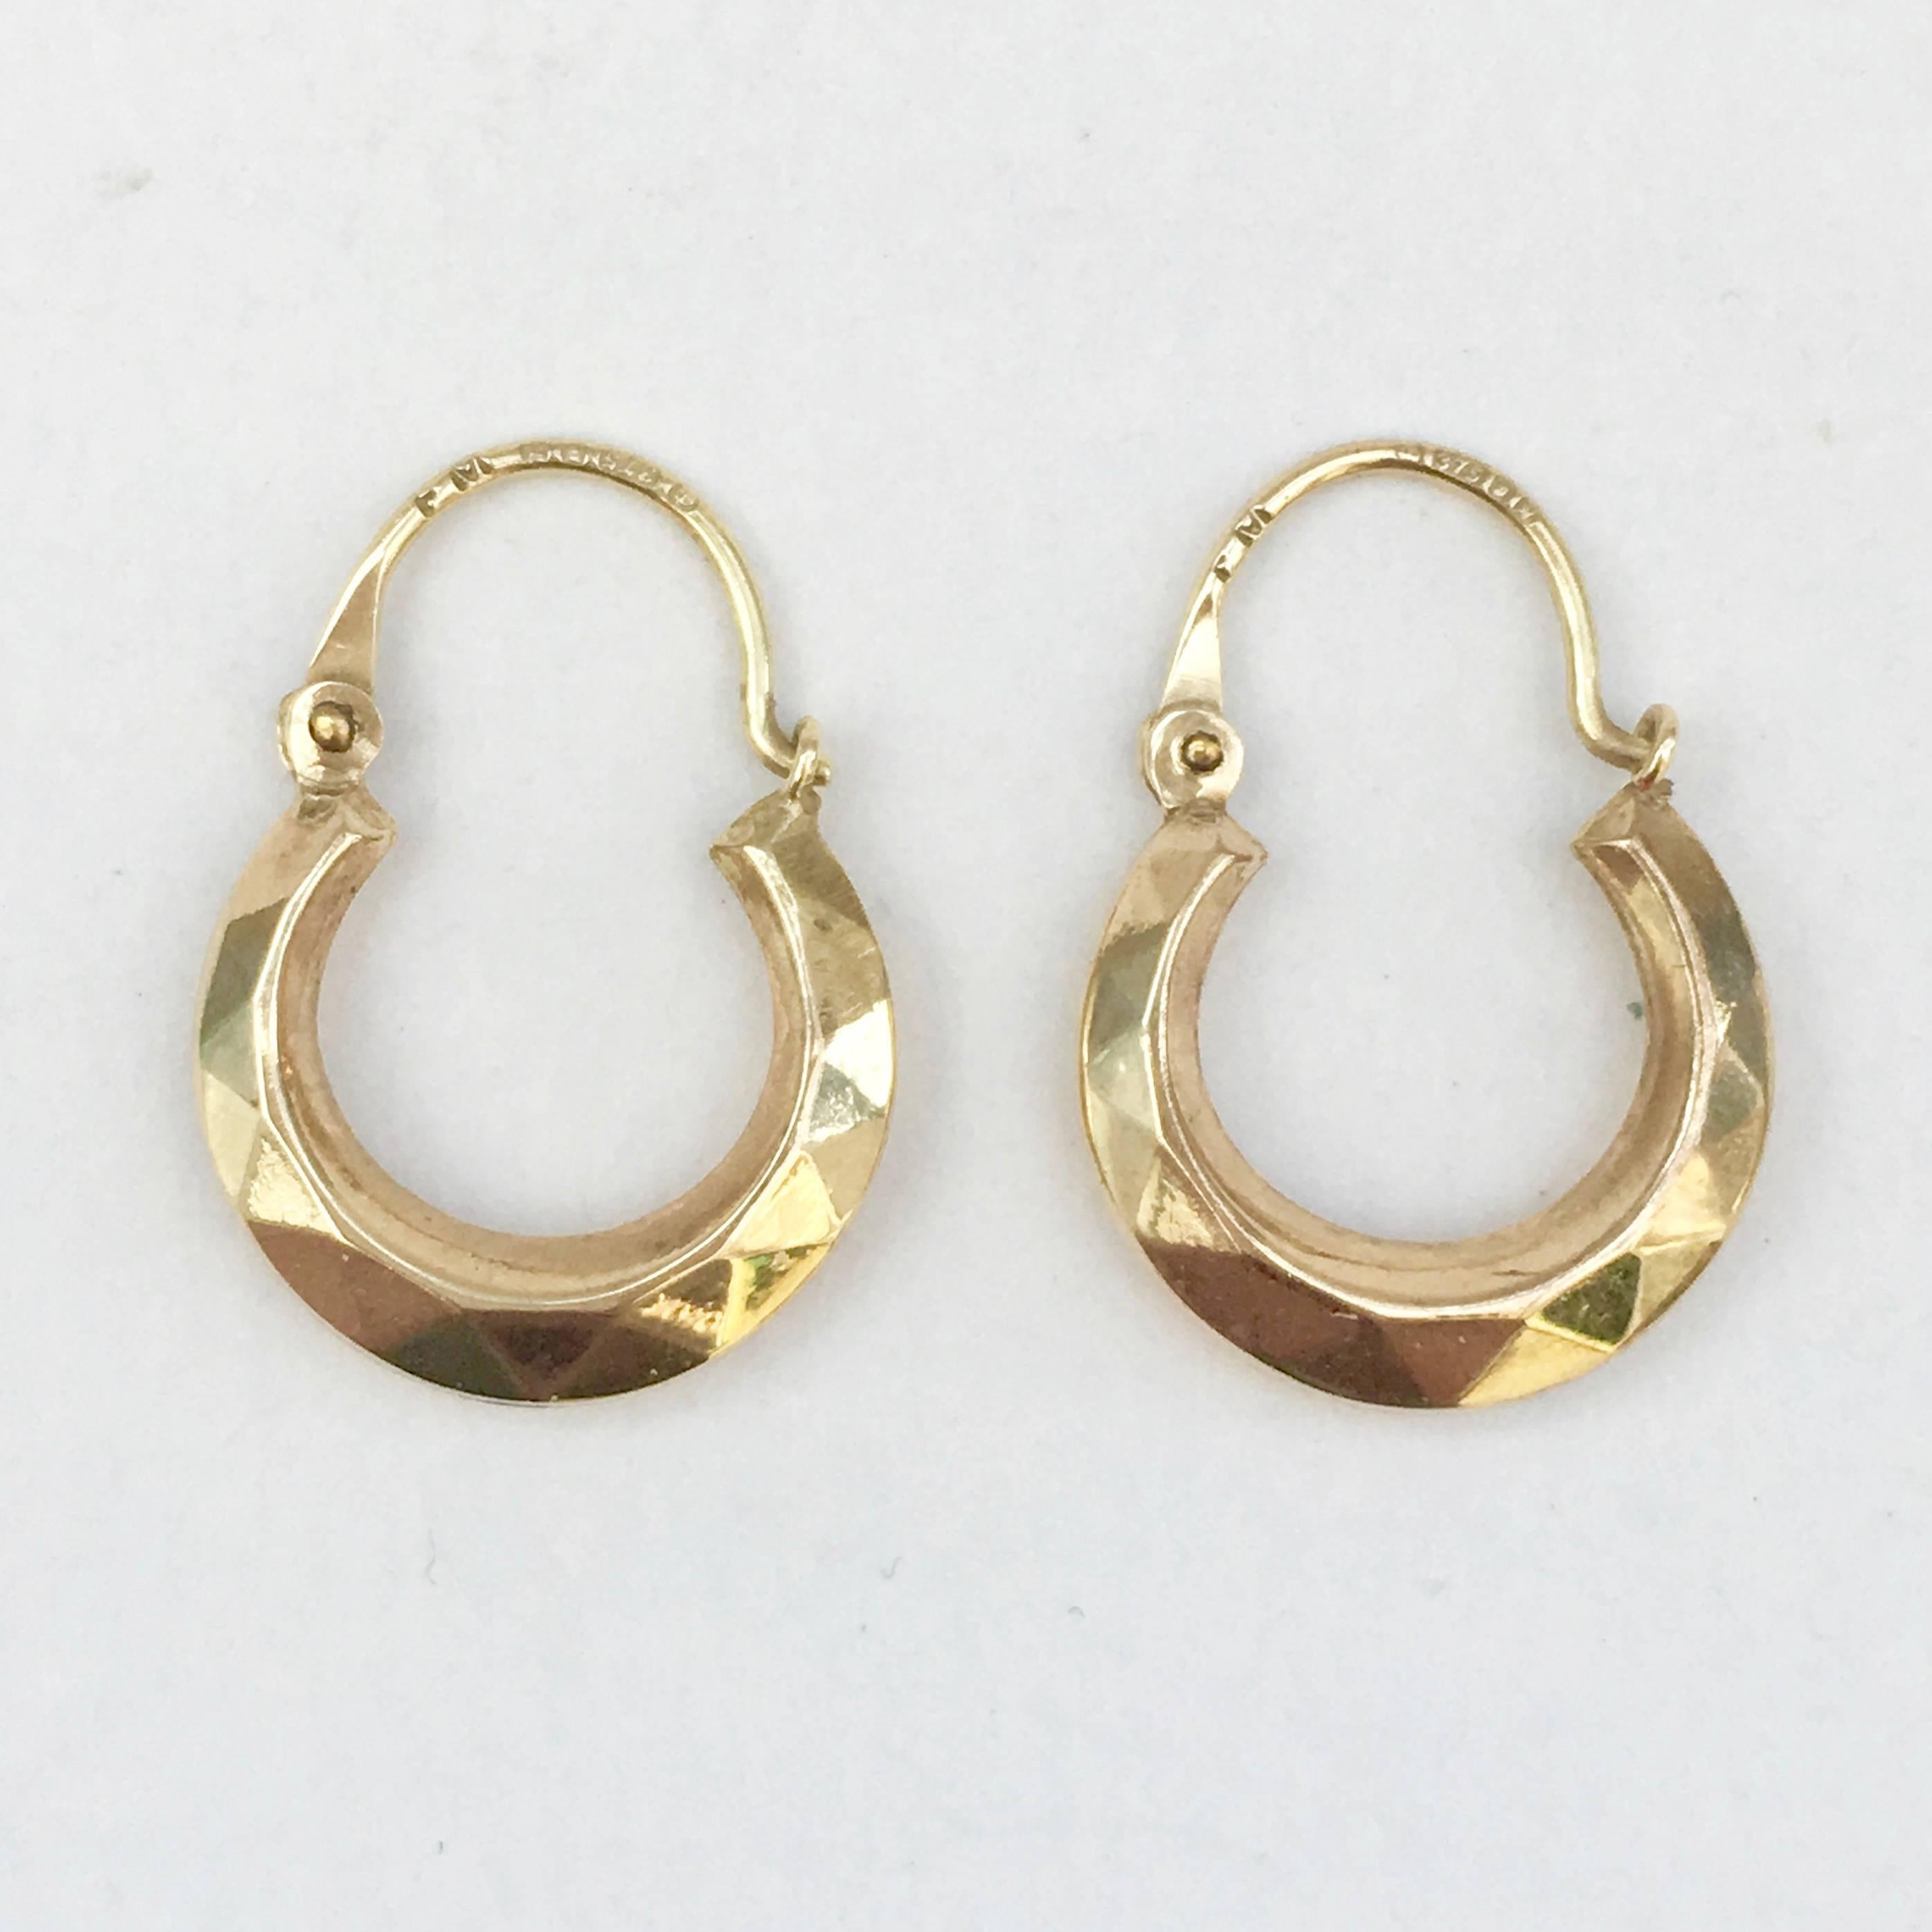 A lovely pair of vintage gold hoop earrings in an understated delicate size. They are hollow and lightweight, so extremely wearable. A stylish must-have for every earring lover.